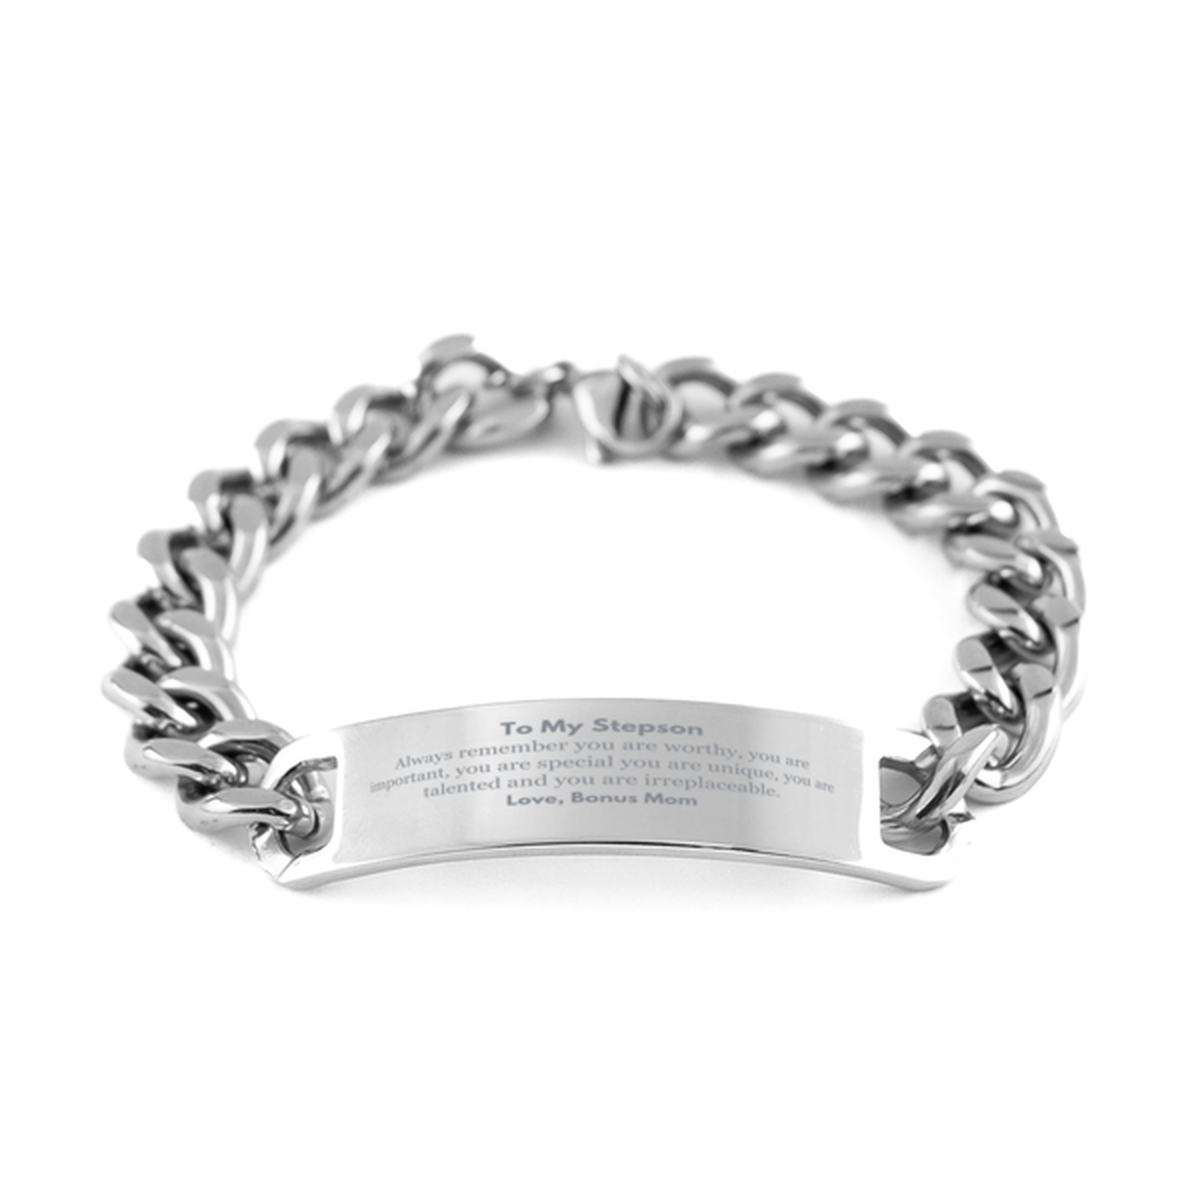 Stepson Birthday Gifts from Bonus Mom, Inspirational Cuban Chain Stainless Steel Bracelet for Stepson Christmas Graduation Gifts for Stepson Always remember you are worthy, you are important. Love, Bonus Mom